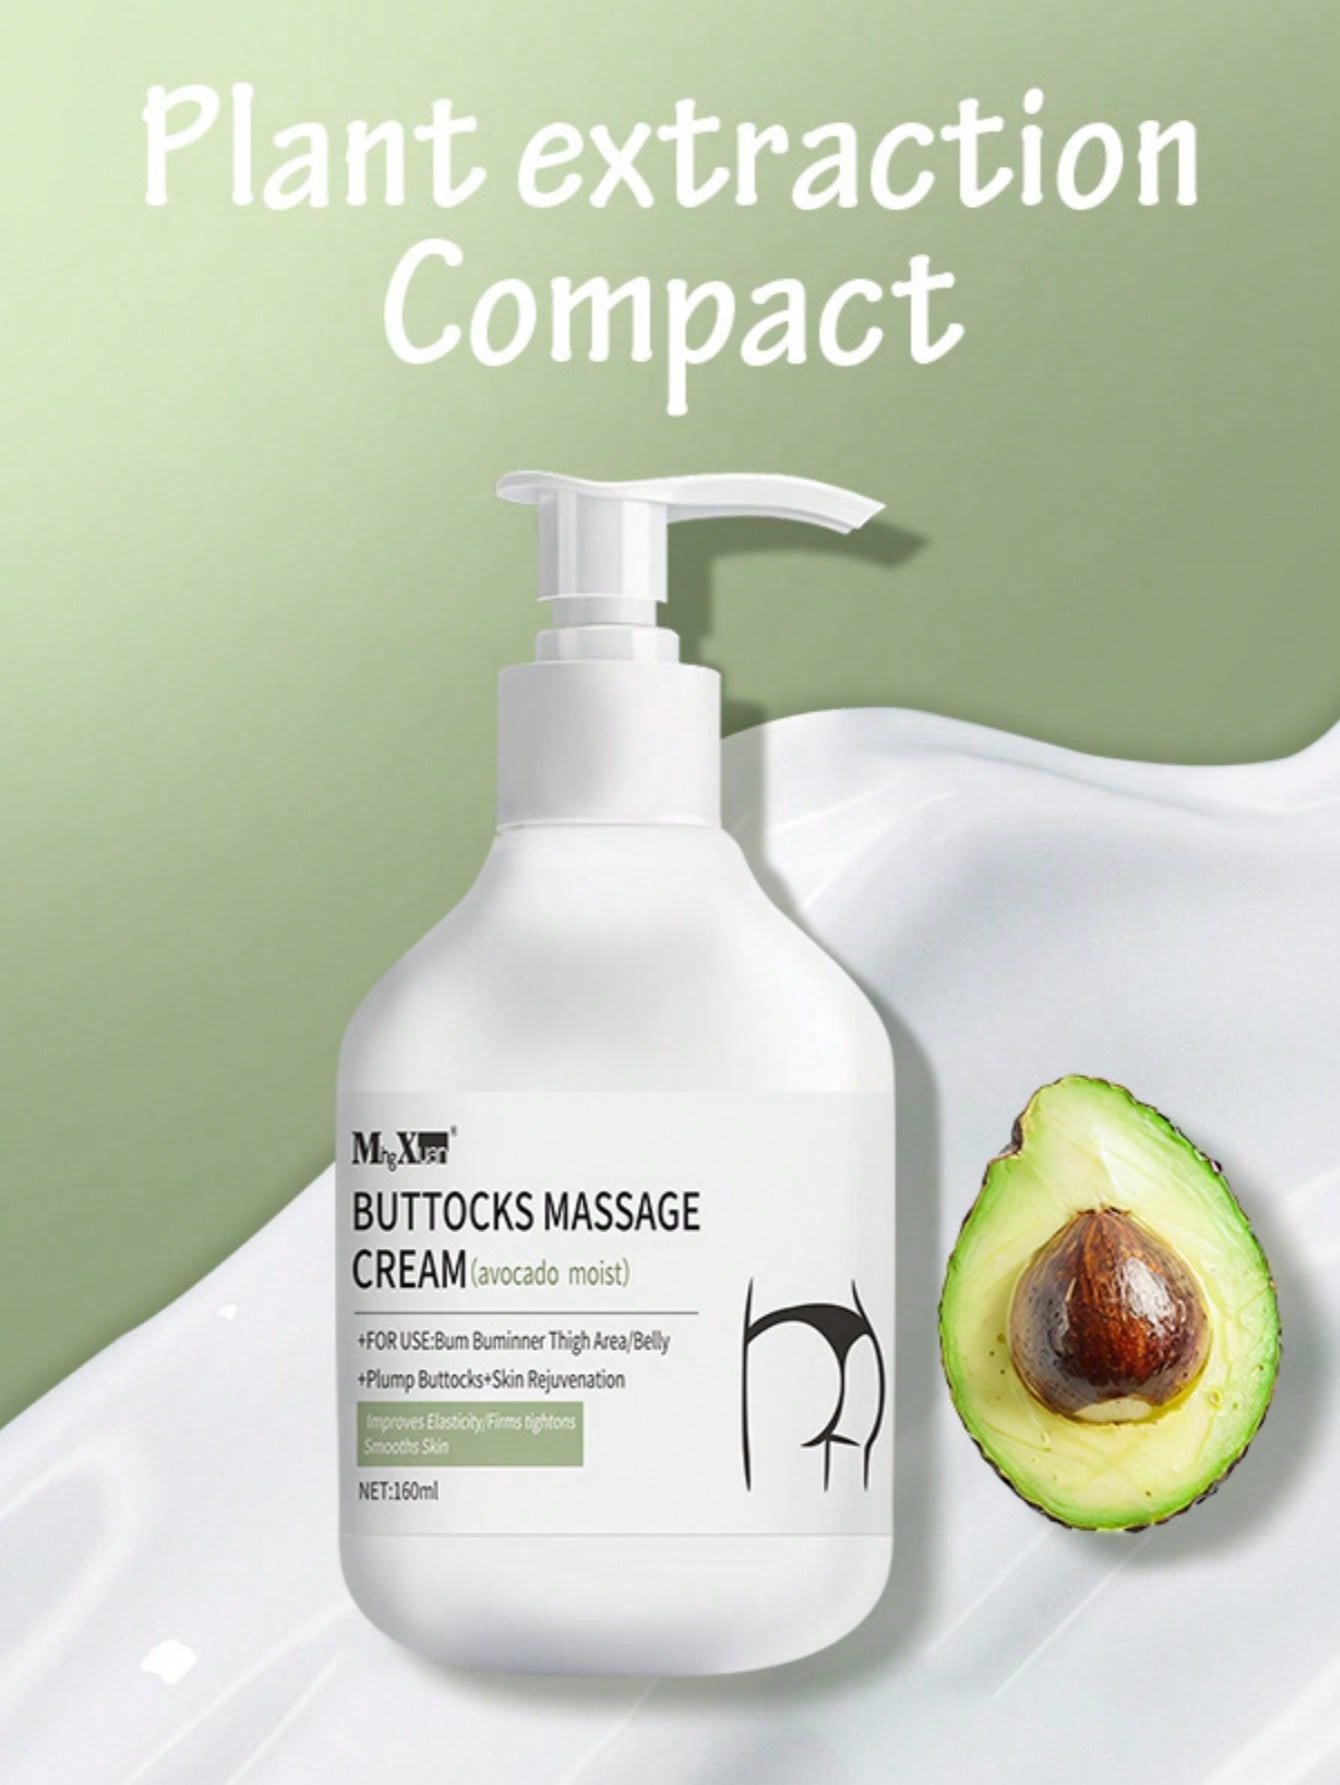 Buttock Lifting Cream 160g, Avocado Nutrient Moisturizing Firming And Plumping Elasticity Enhancing Cream For Daily Use At Home